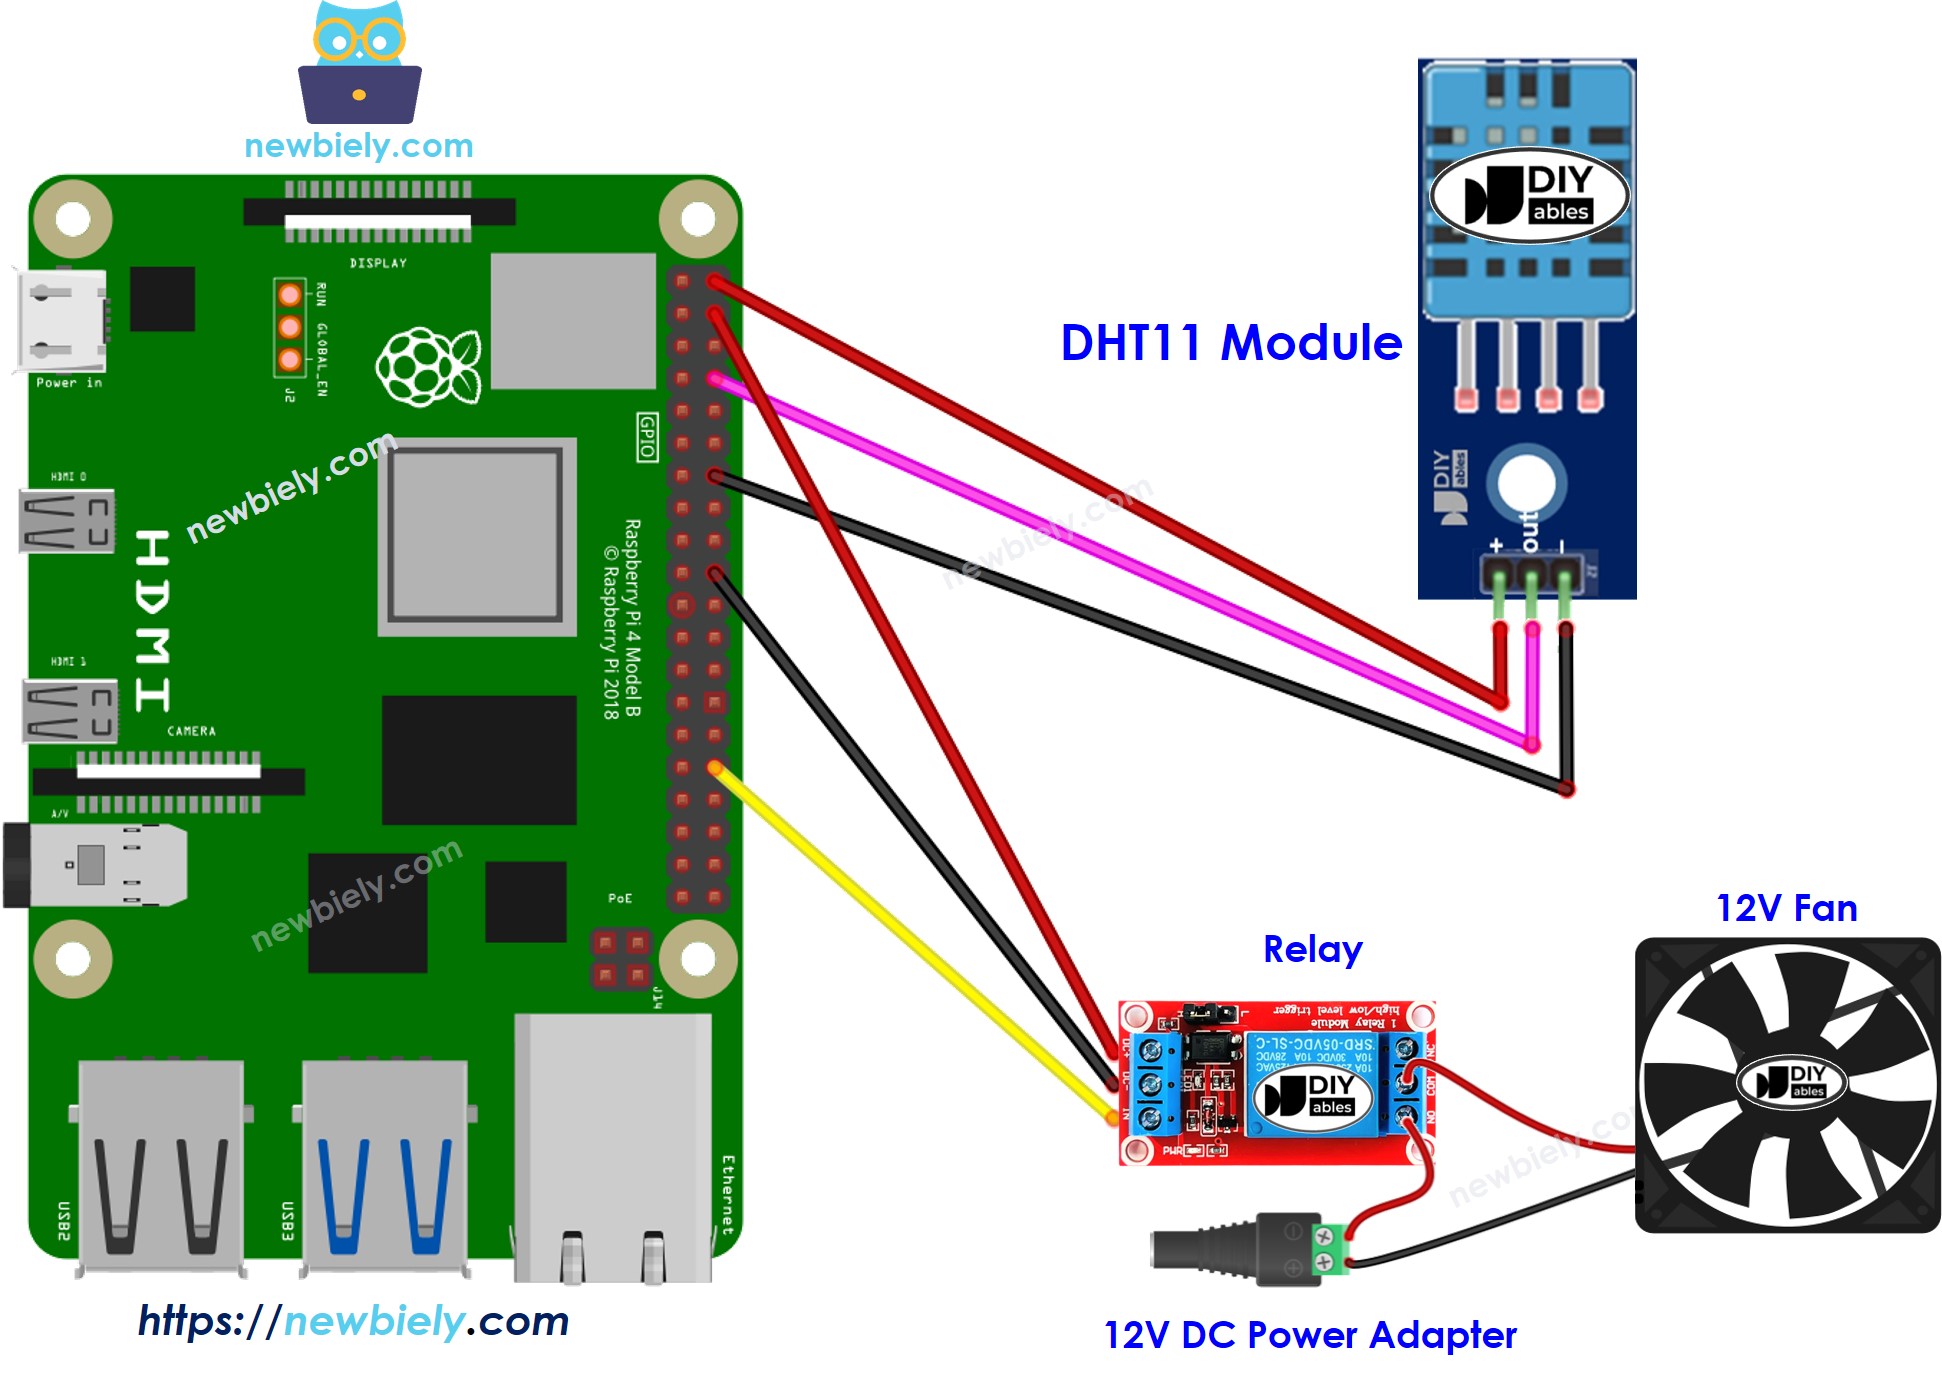 The wiring diagram between Raspberry Pi and DHT11 cooling fan system